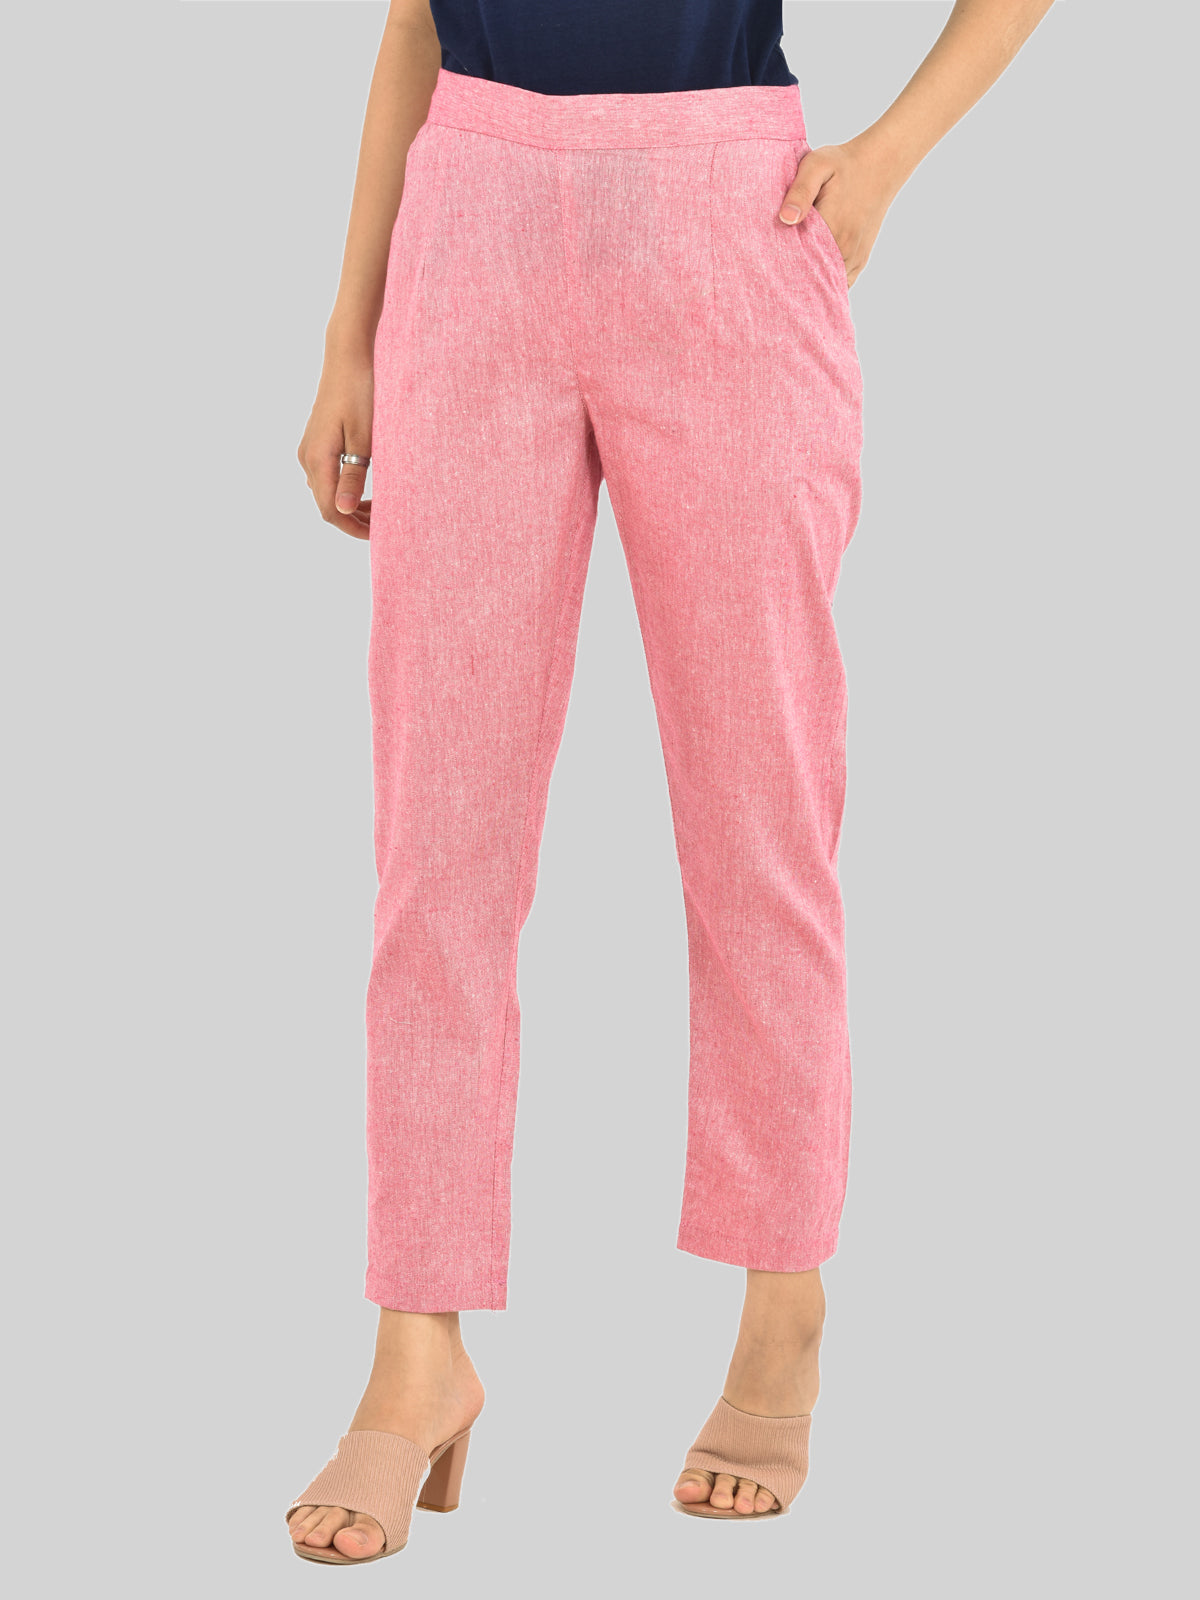 Women Solid Pink South Cotton Trouser